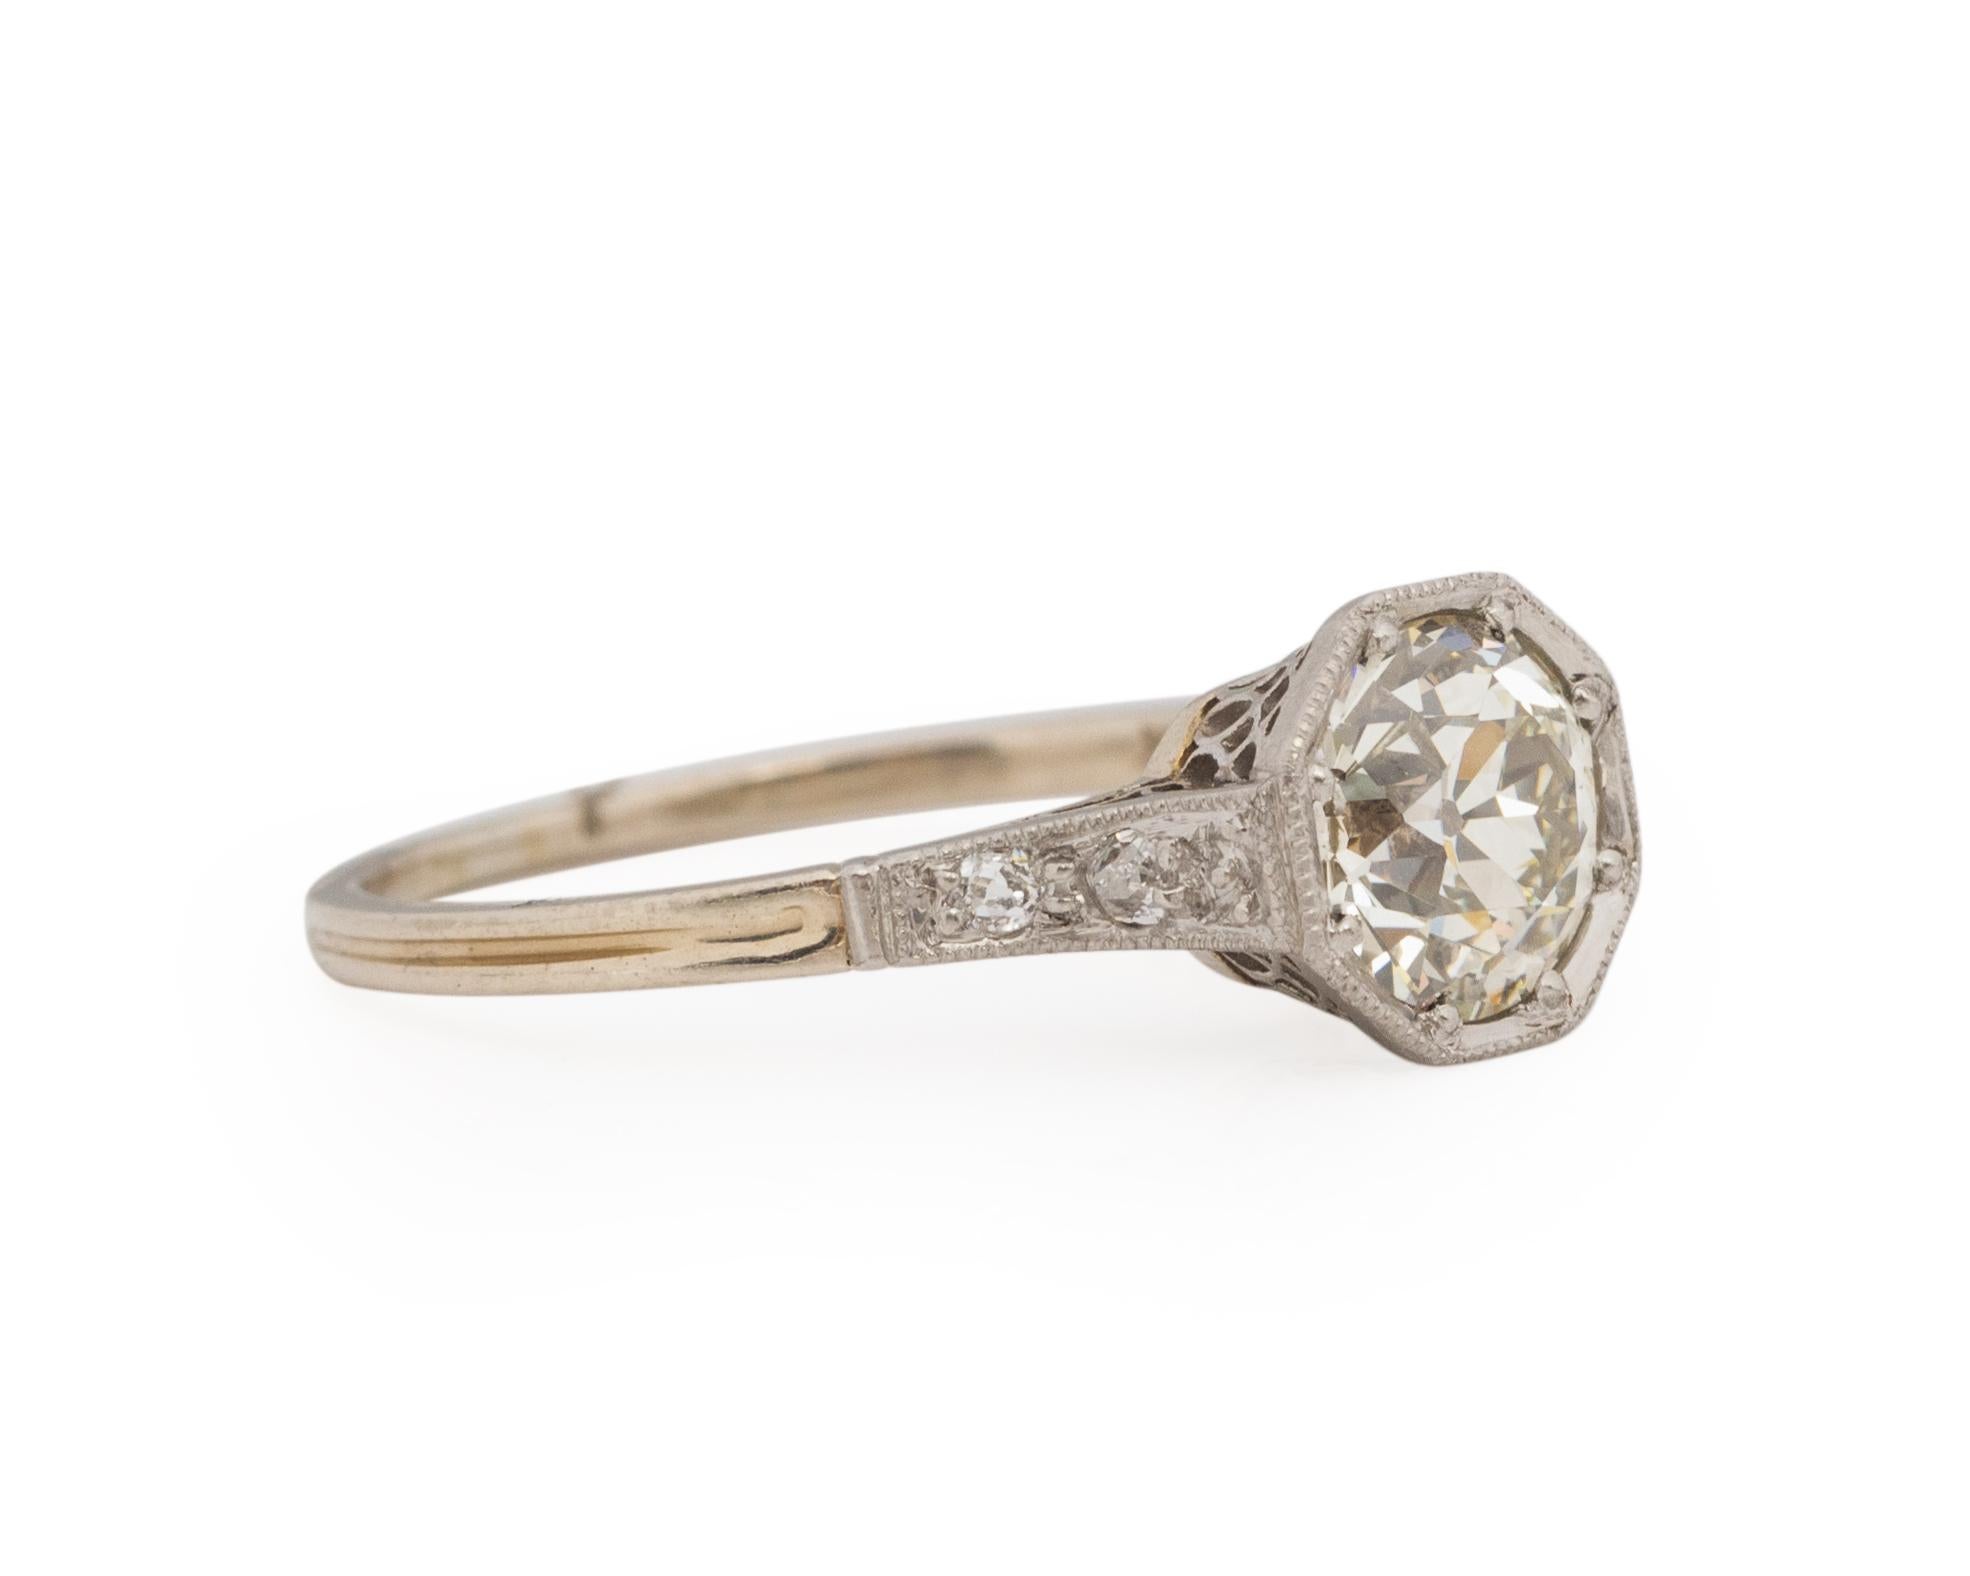 Ring Size: 6.5
Metal Type: Platinum & 14K Yellow Gold [Hallmarked, and Tested]
Weight: 3.0 grams

Center Diamond Details:
GIA REPORT #: 5221045017
Weight: 1.29ct
Cut: Old European brilliant
Color: N
Clarity: VS1
Measurements: 6.79mm x 6.67mm x